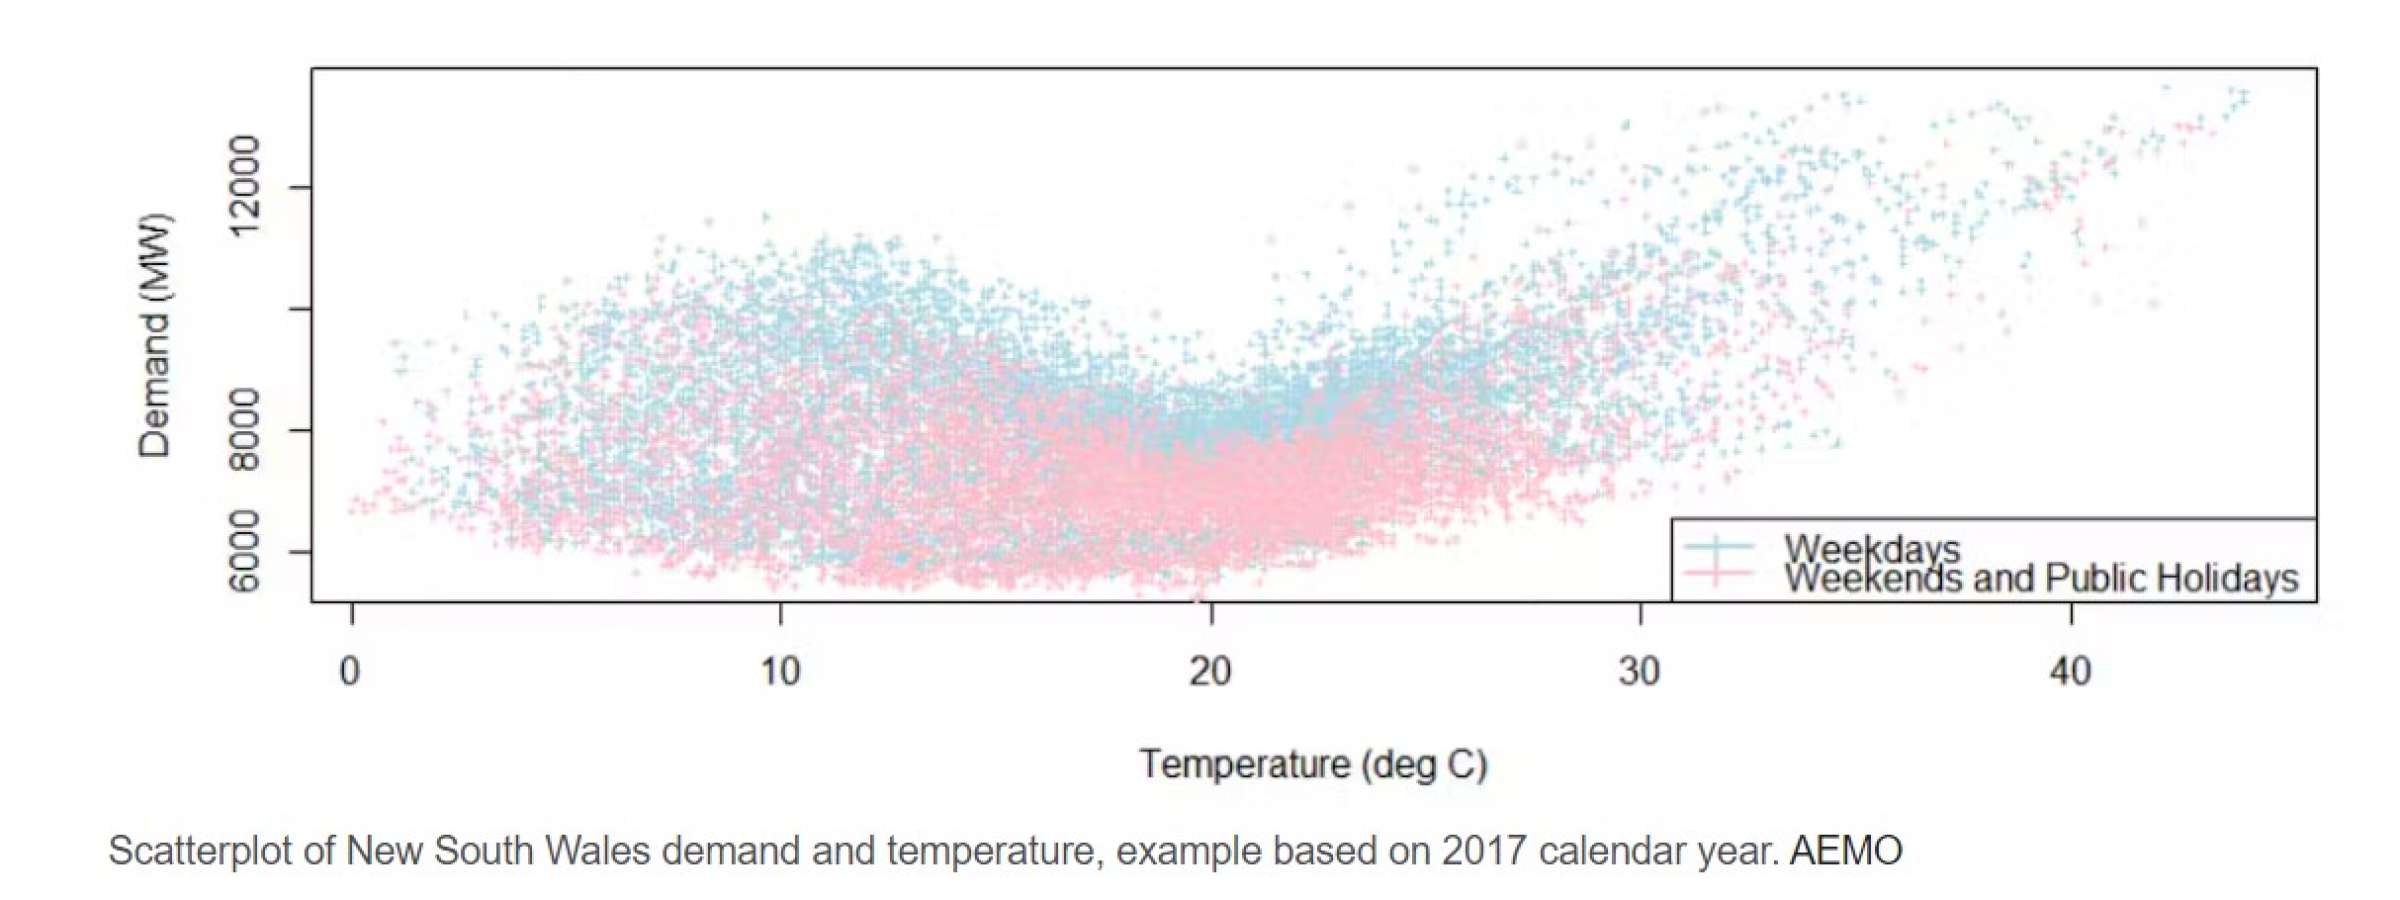 Scatterplot - NSW demand and temperature